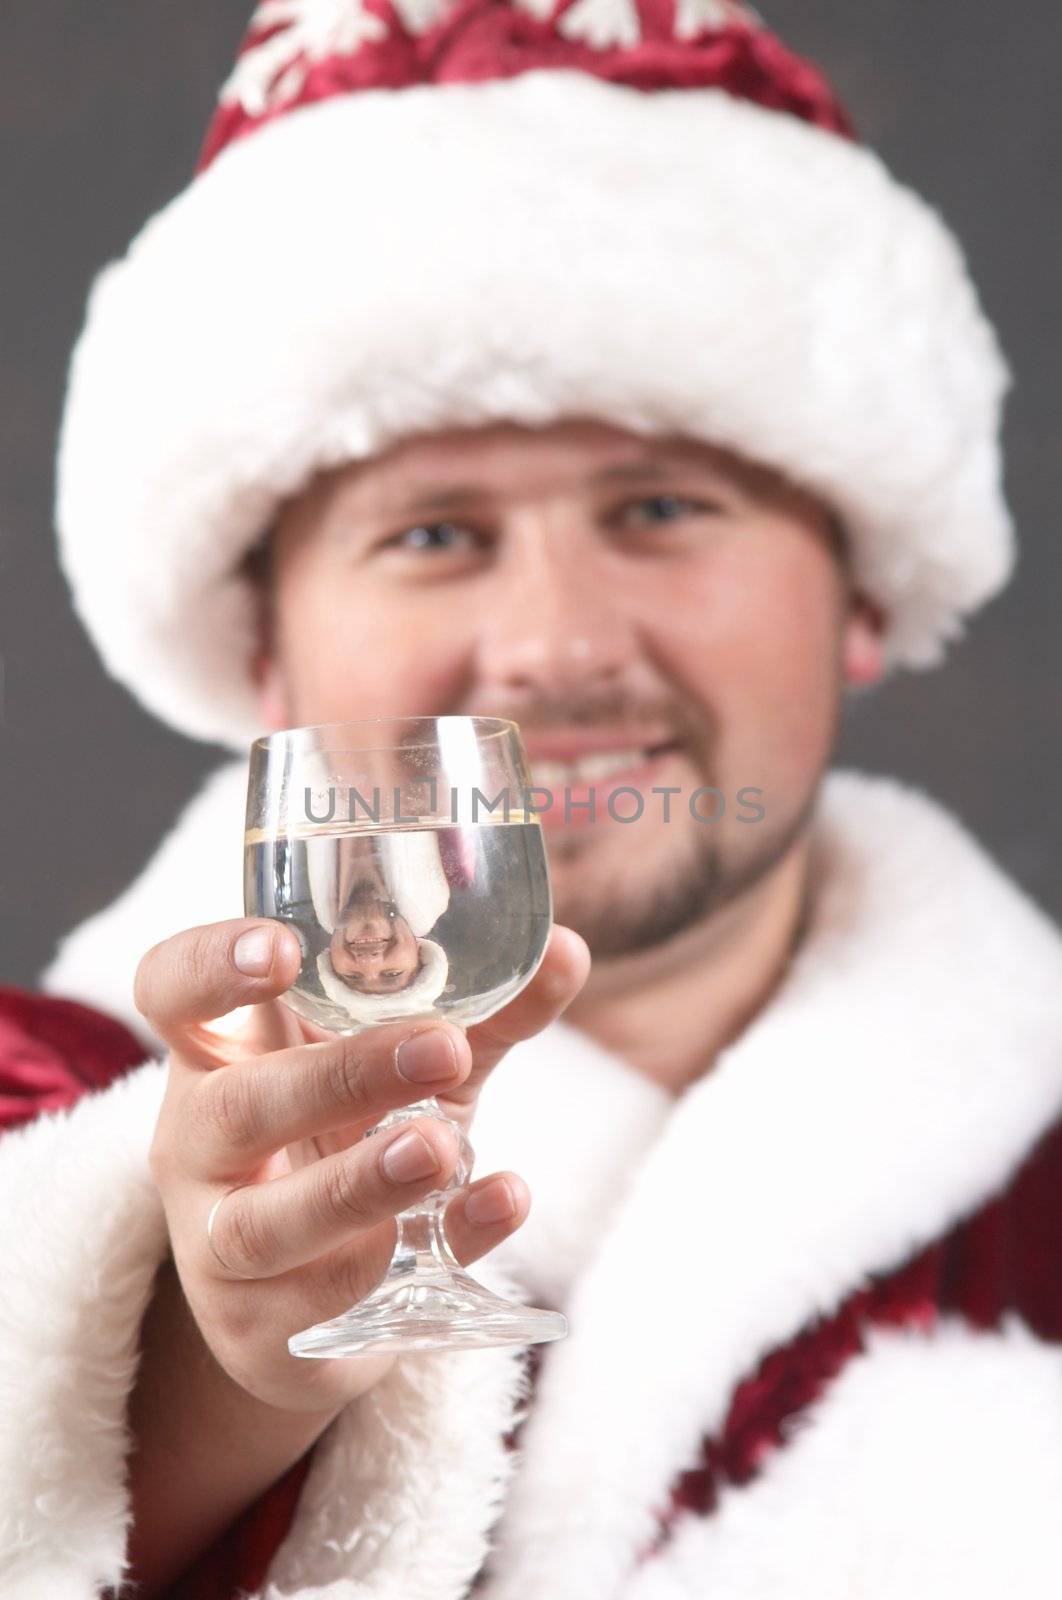 An image of Santa Claus drinking champagne